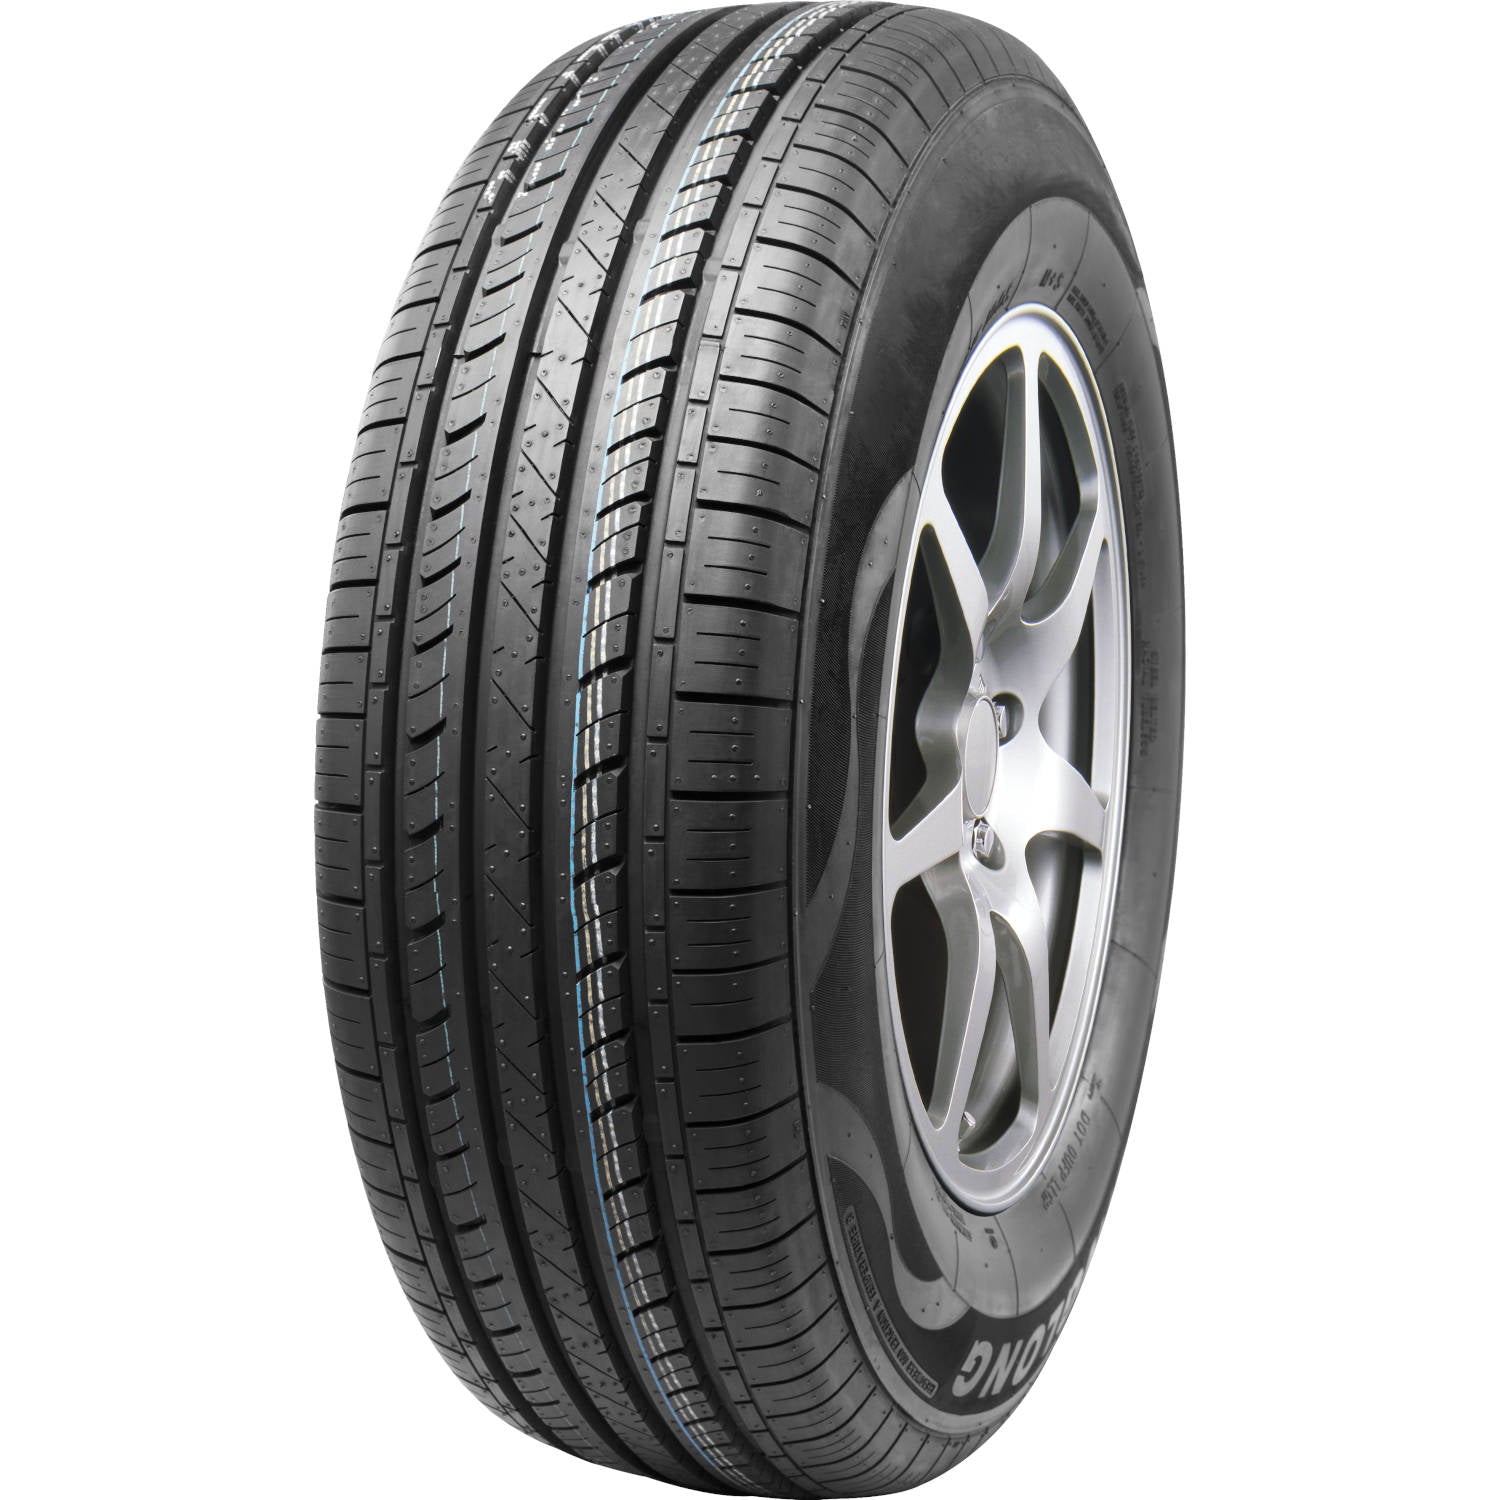 ROAD ONE CAVALRY A/S 215/60R16 (26.1X8.5R 16) Tires